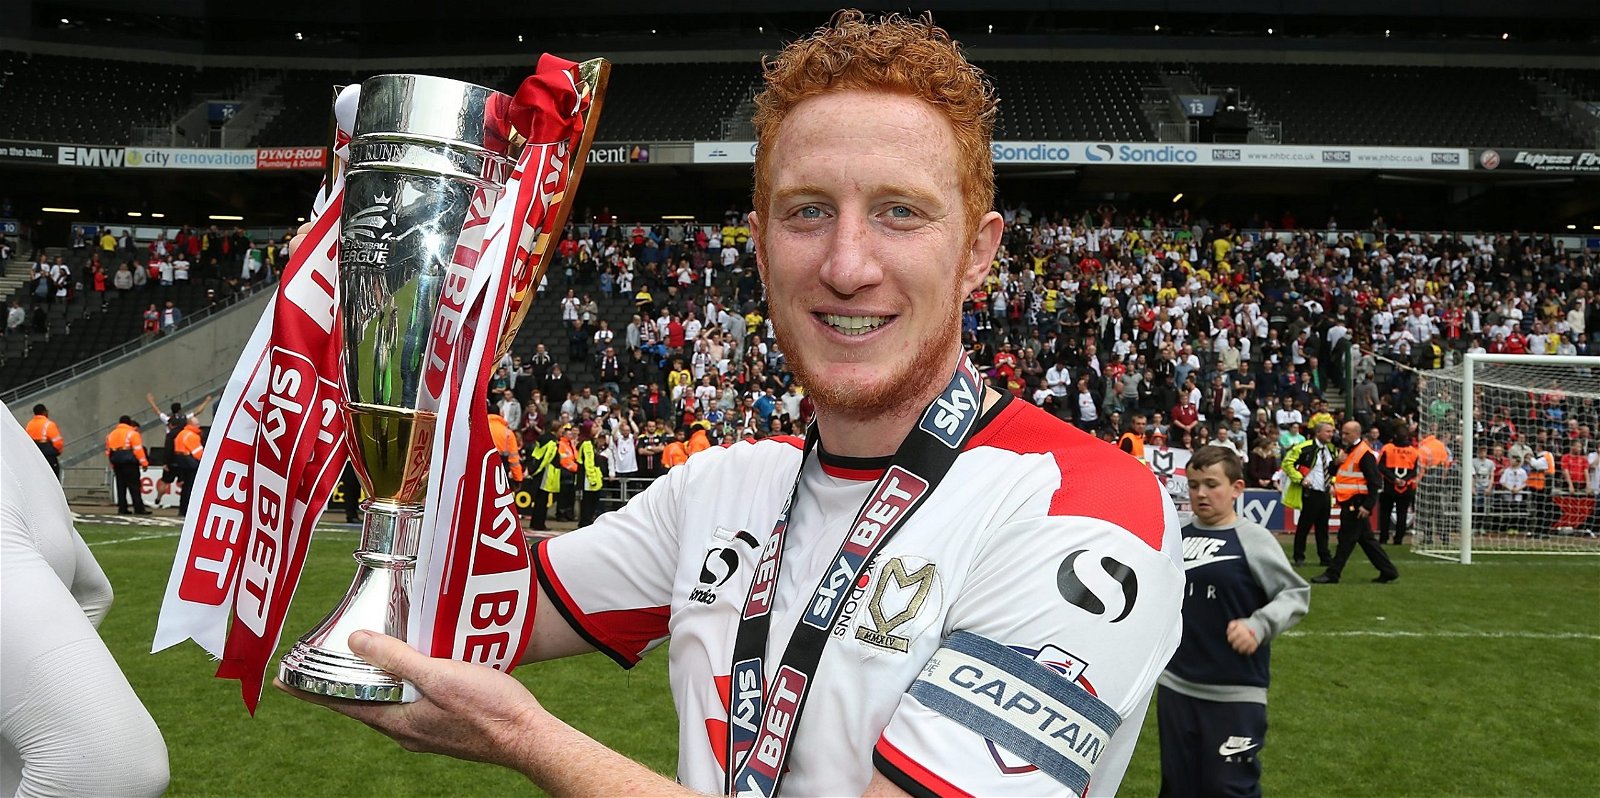 MK Dons, MK Dons&#8217; top 5 centre-backs of the 21st Century &#8211; do you agree?